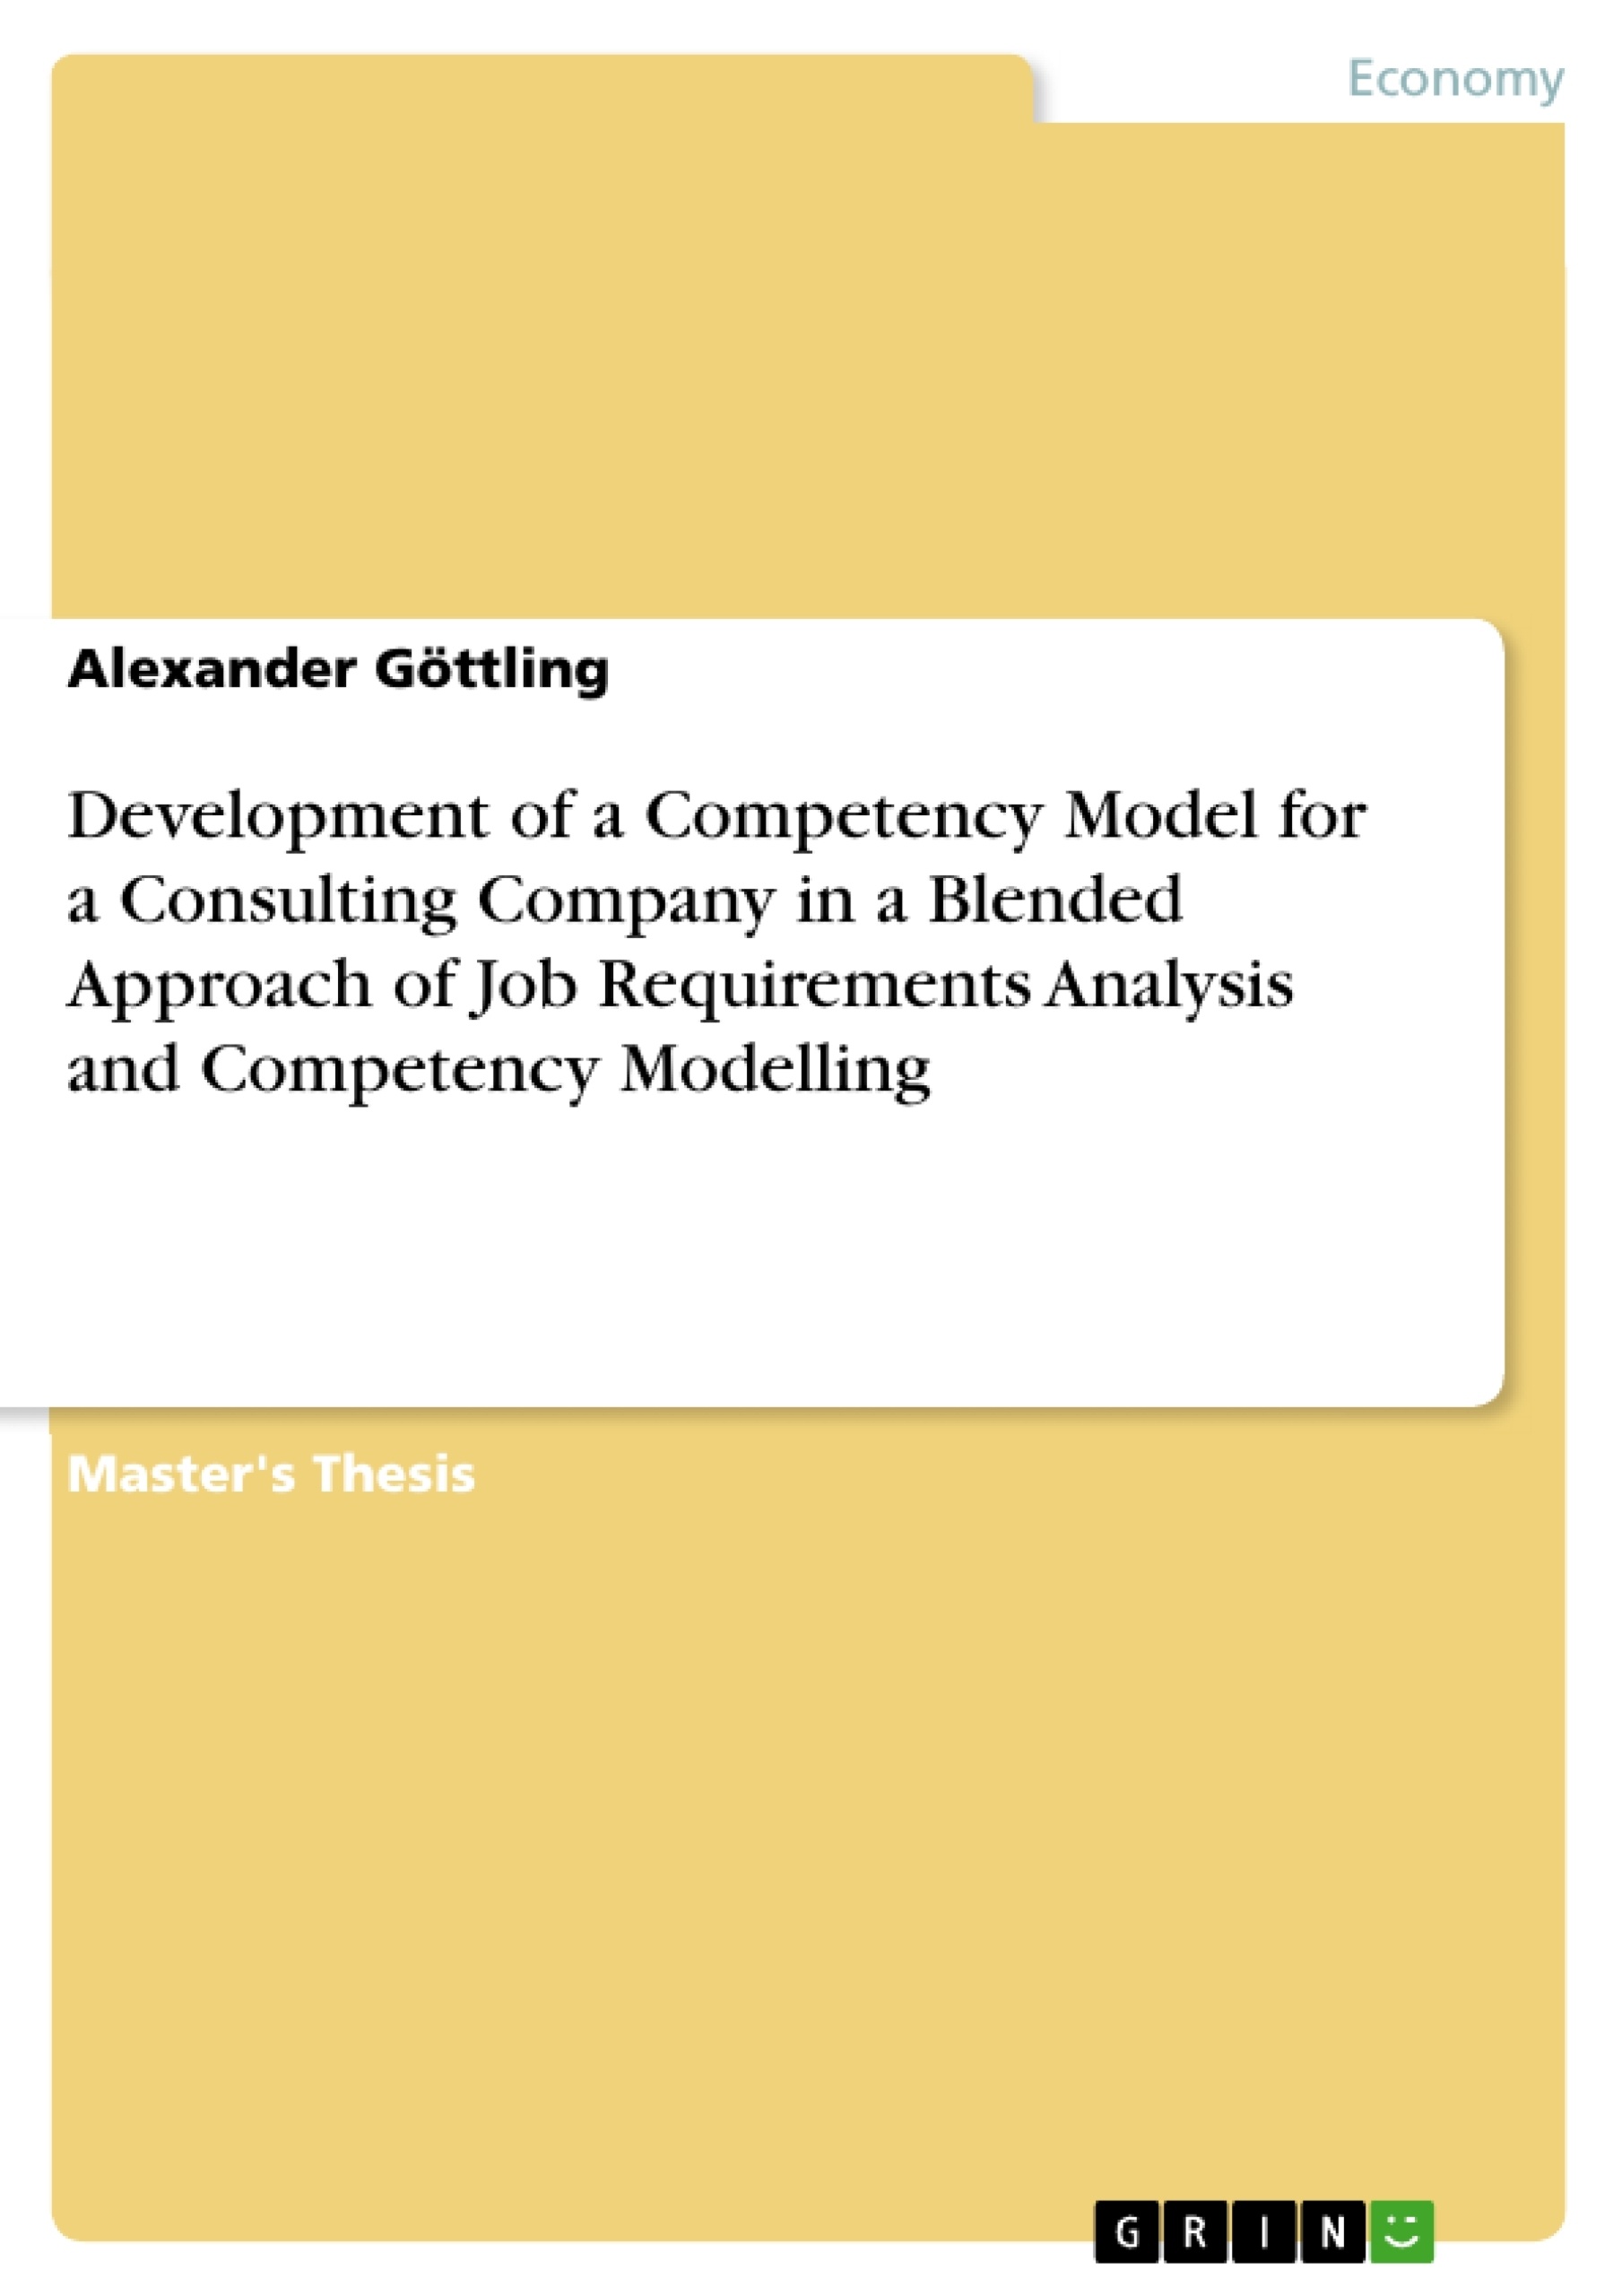 Title: Development of a Competency Model for a Consulting Company in a Blended Approach of Job Requirements Analysis and Competency Modelling